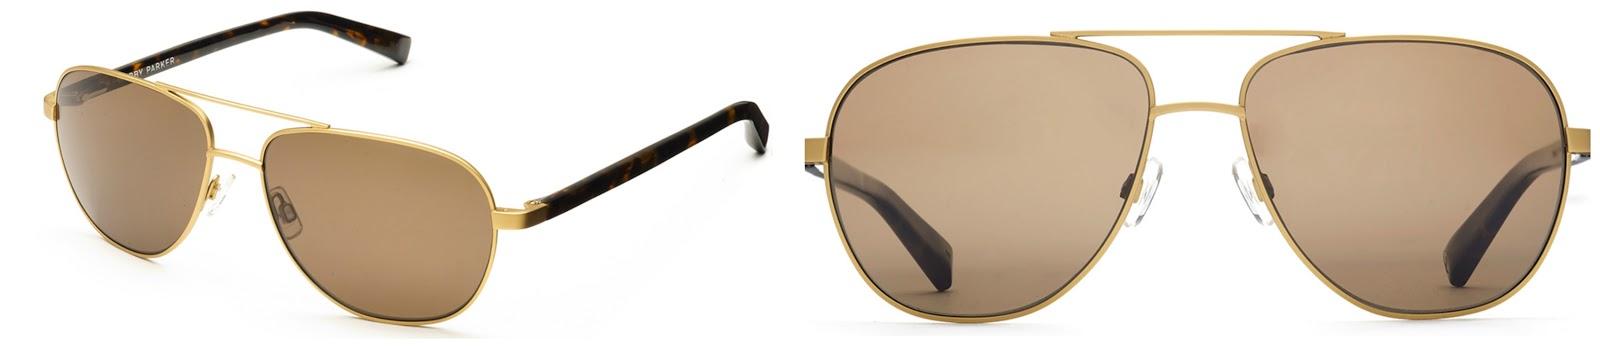 WARBY PARKER - MERIDIAN COLLECTION